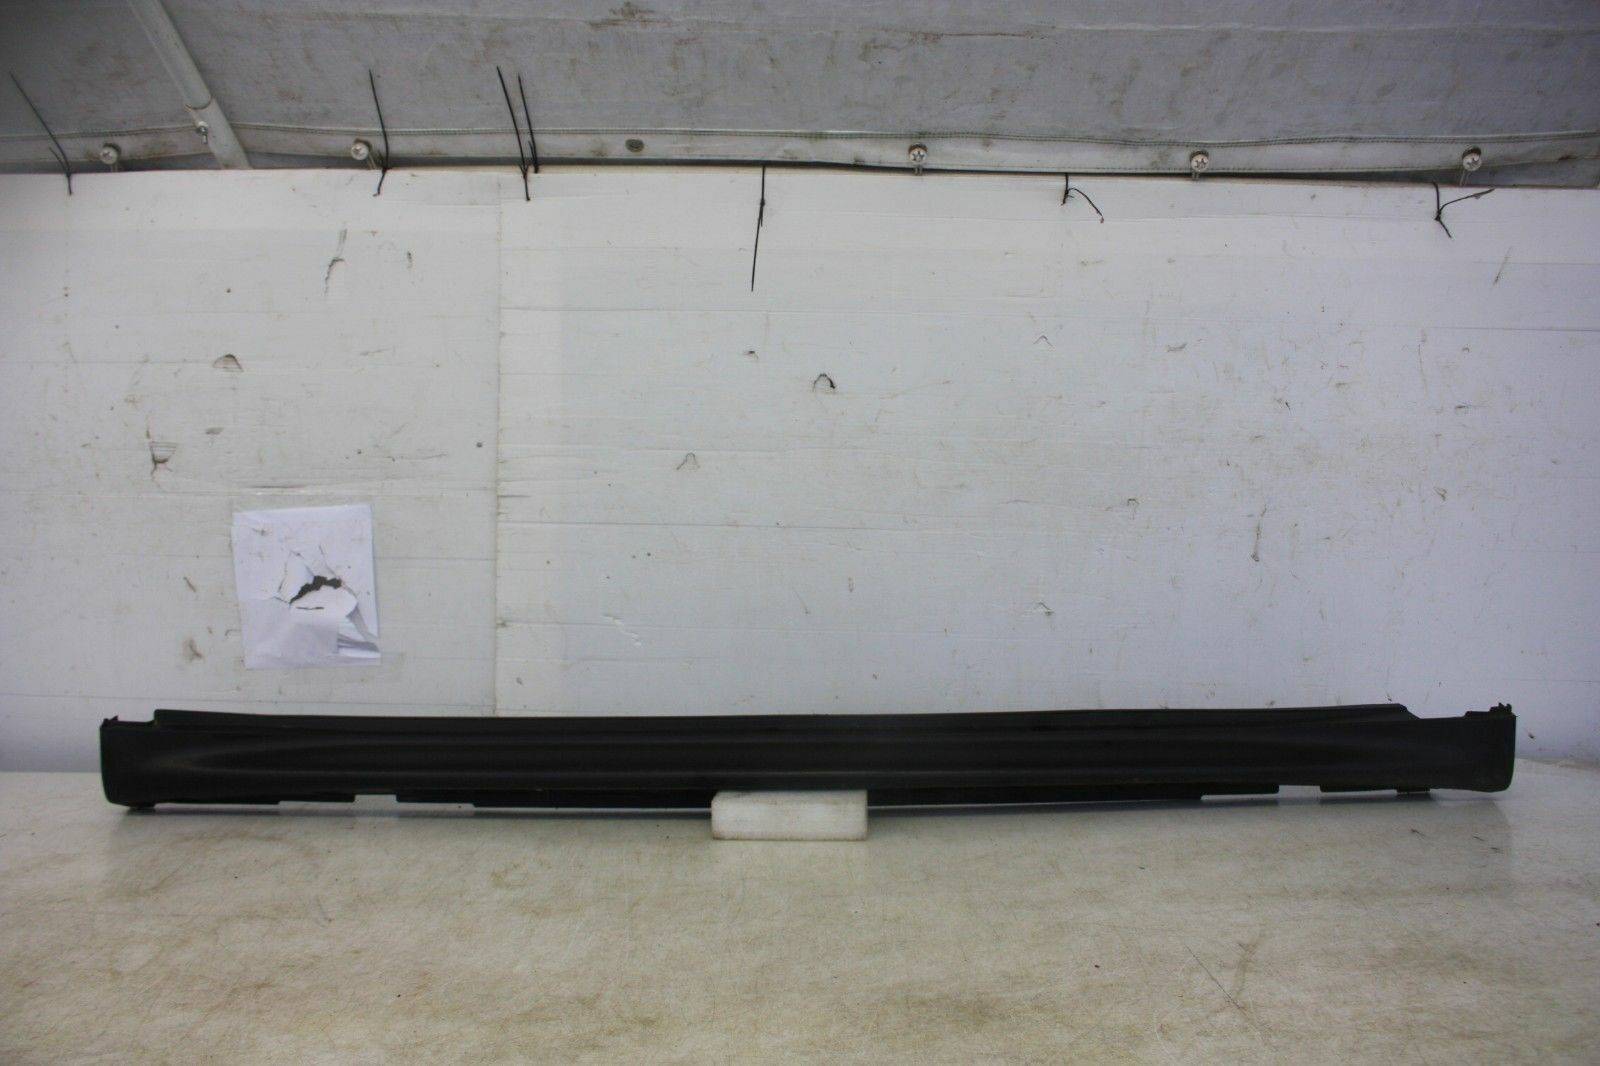 NISSAN-JUKE-RIGHT-SIDE-SKIRT-SILL-COVER-2010-TO-2014-175367545063